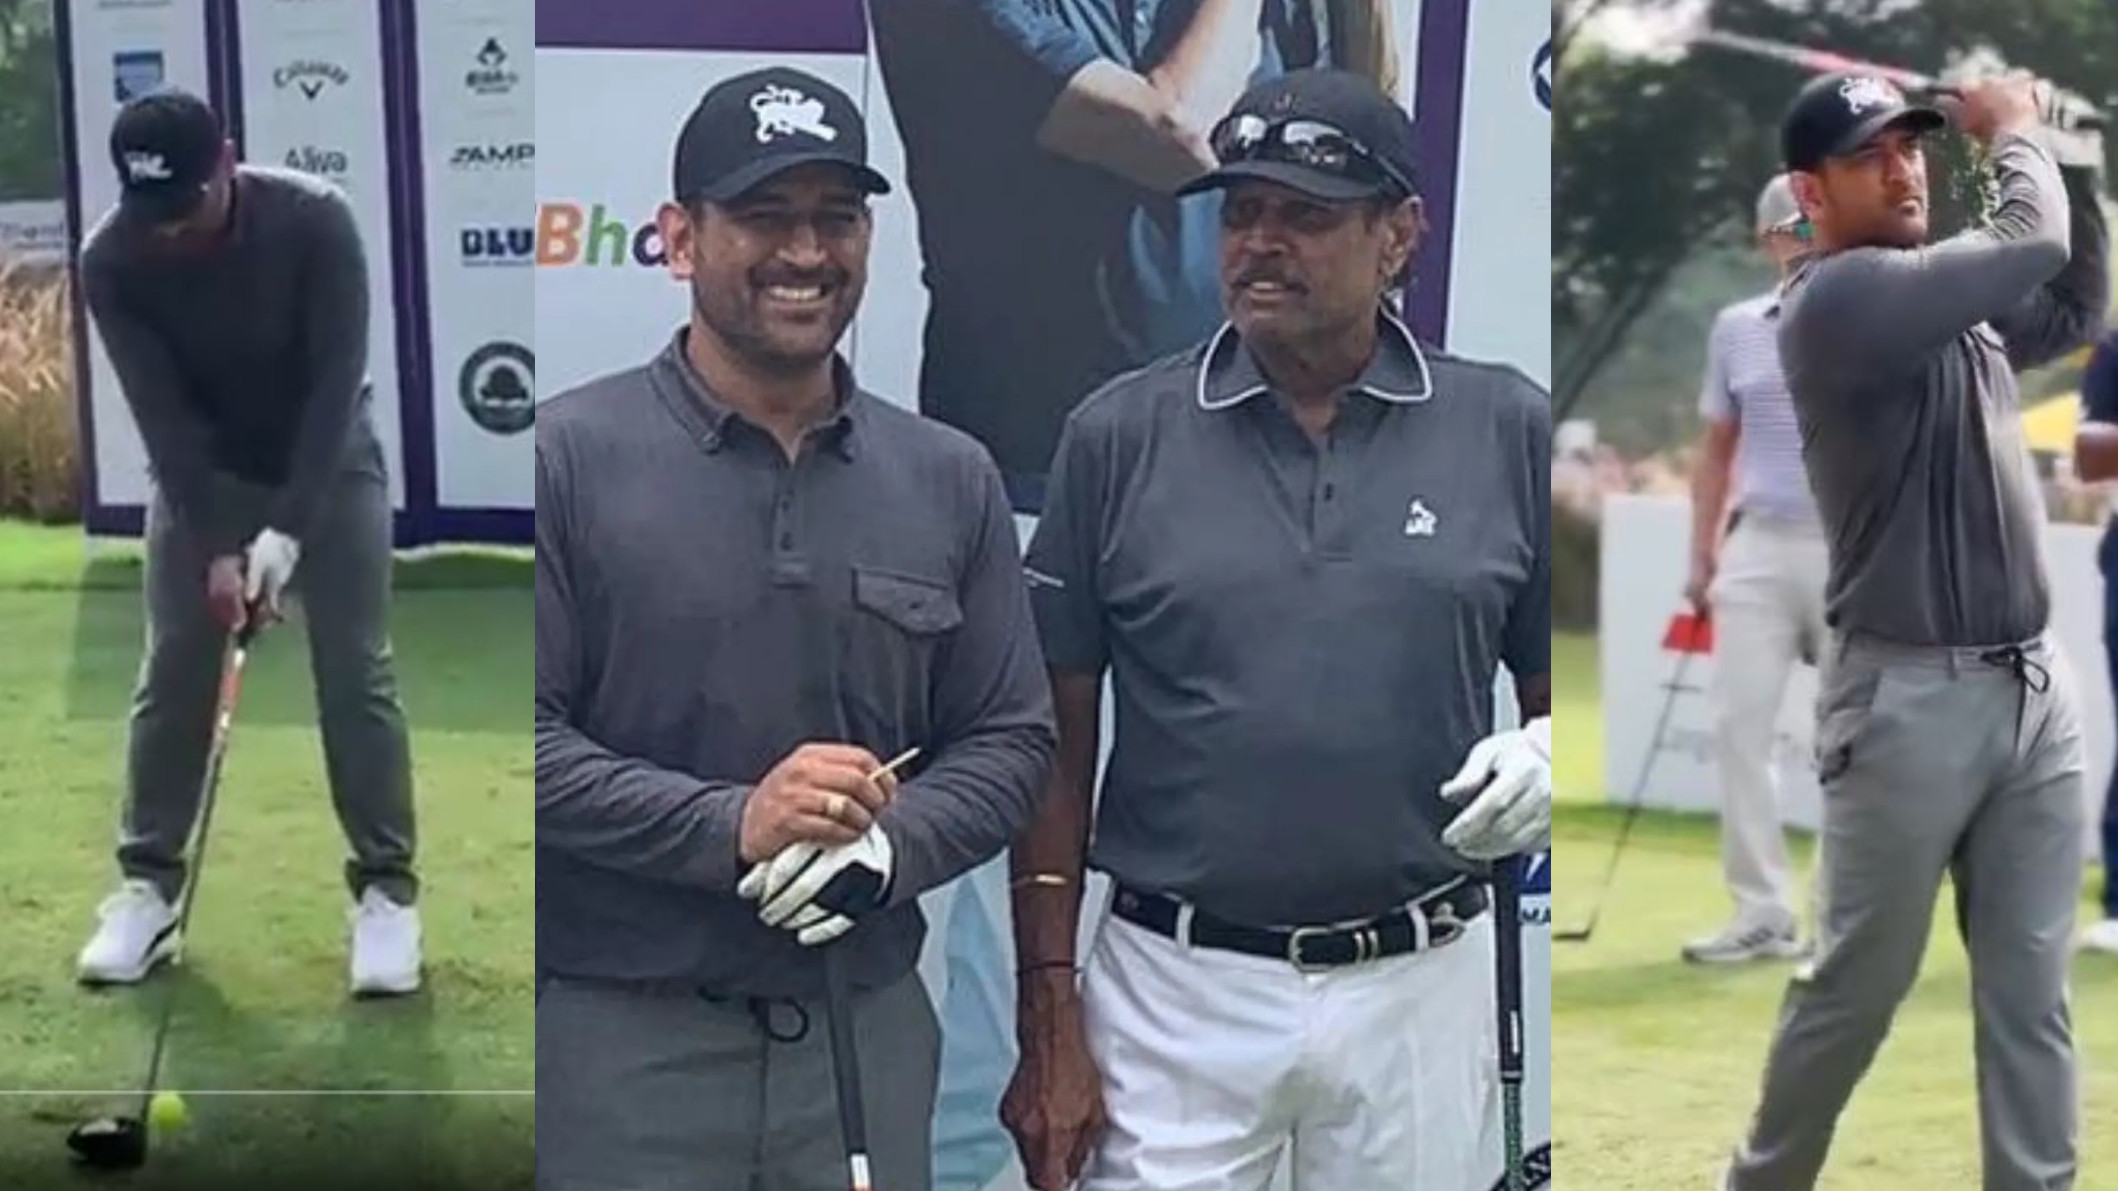 WATCH- MS Dhoni enjoys a game of golf along with legend Kapil Dev